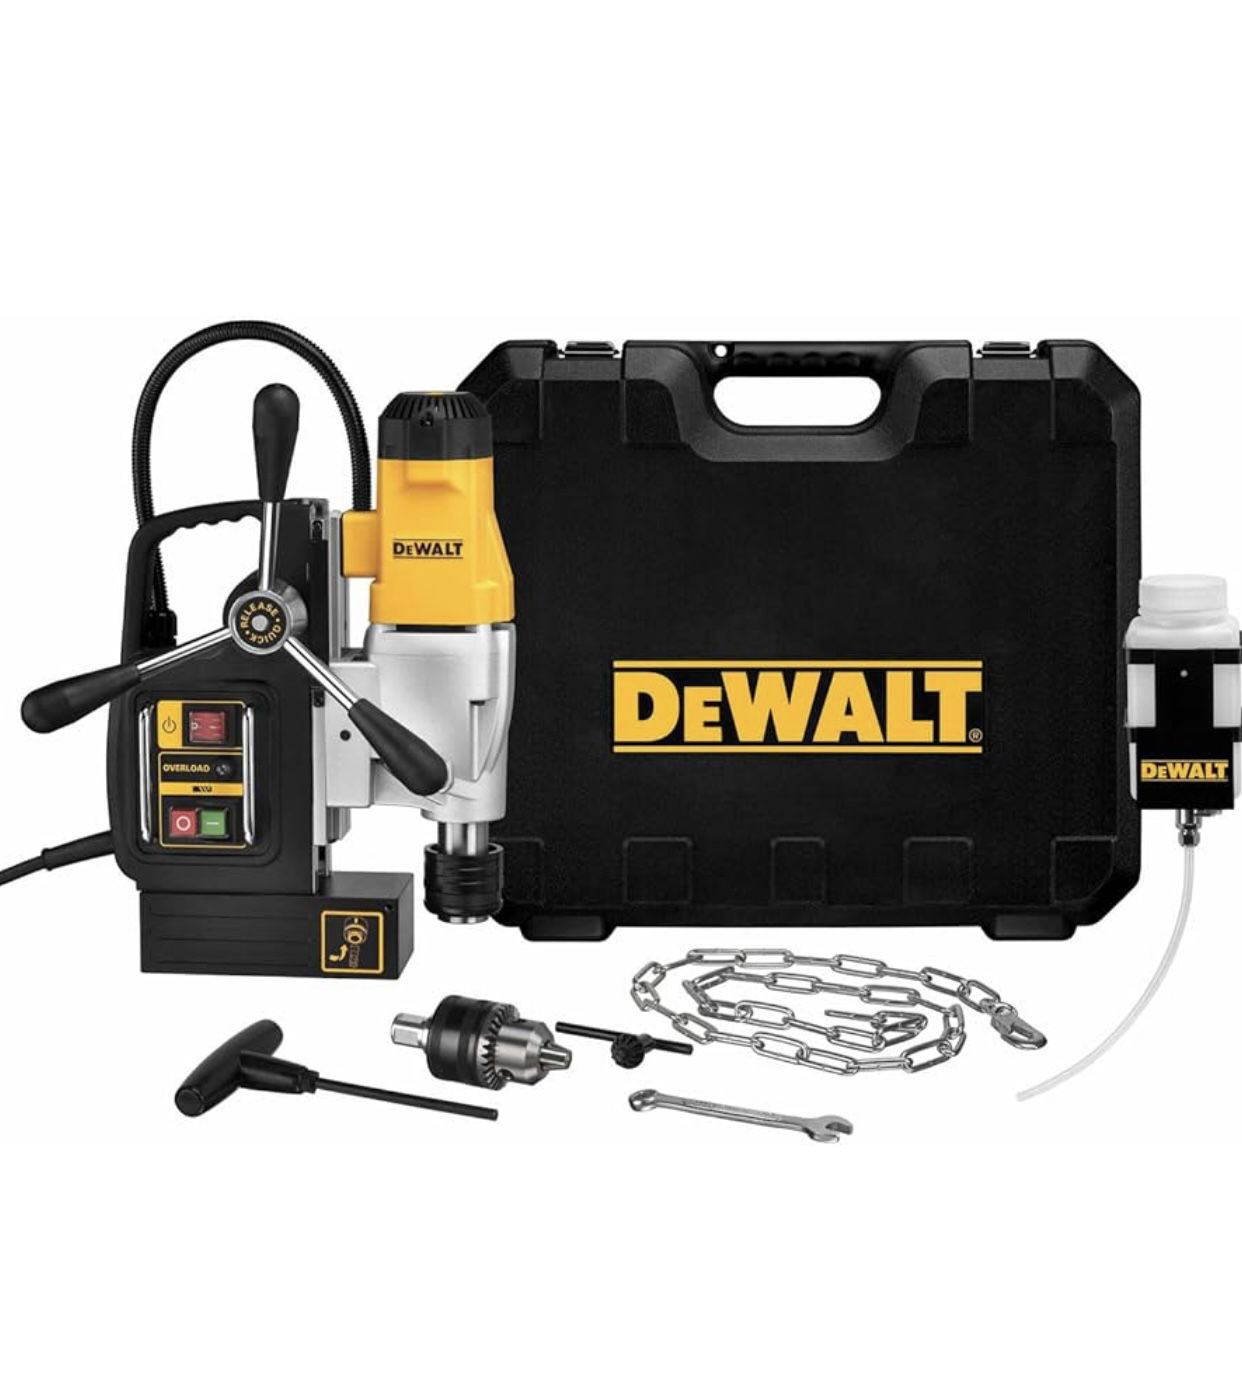 New, DEWALT Drill Press, Magnetic, 2-inch, 10-Amp with 2-Speed Setting (DWE1622K)